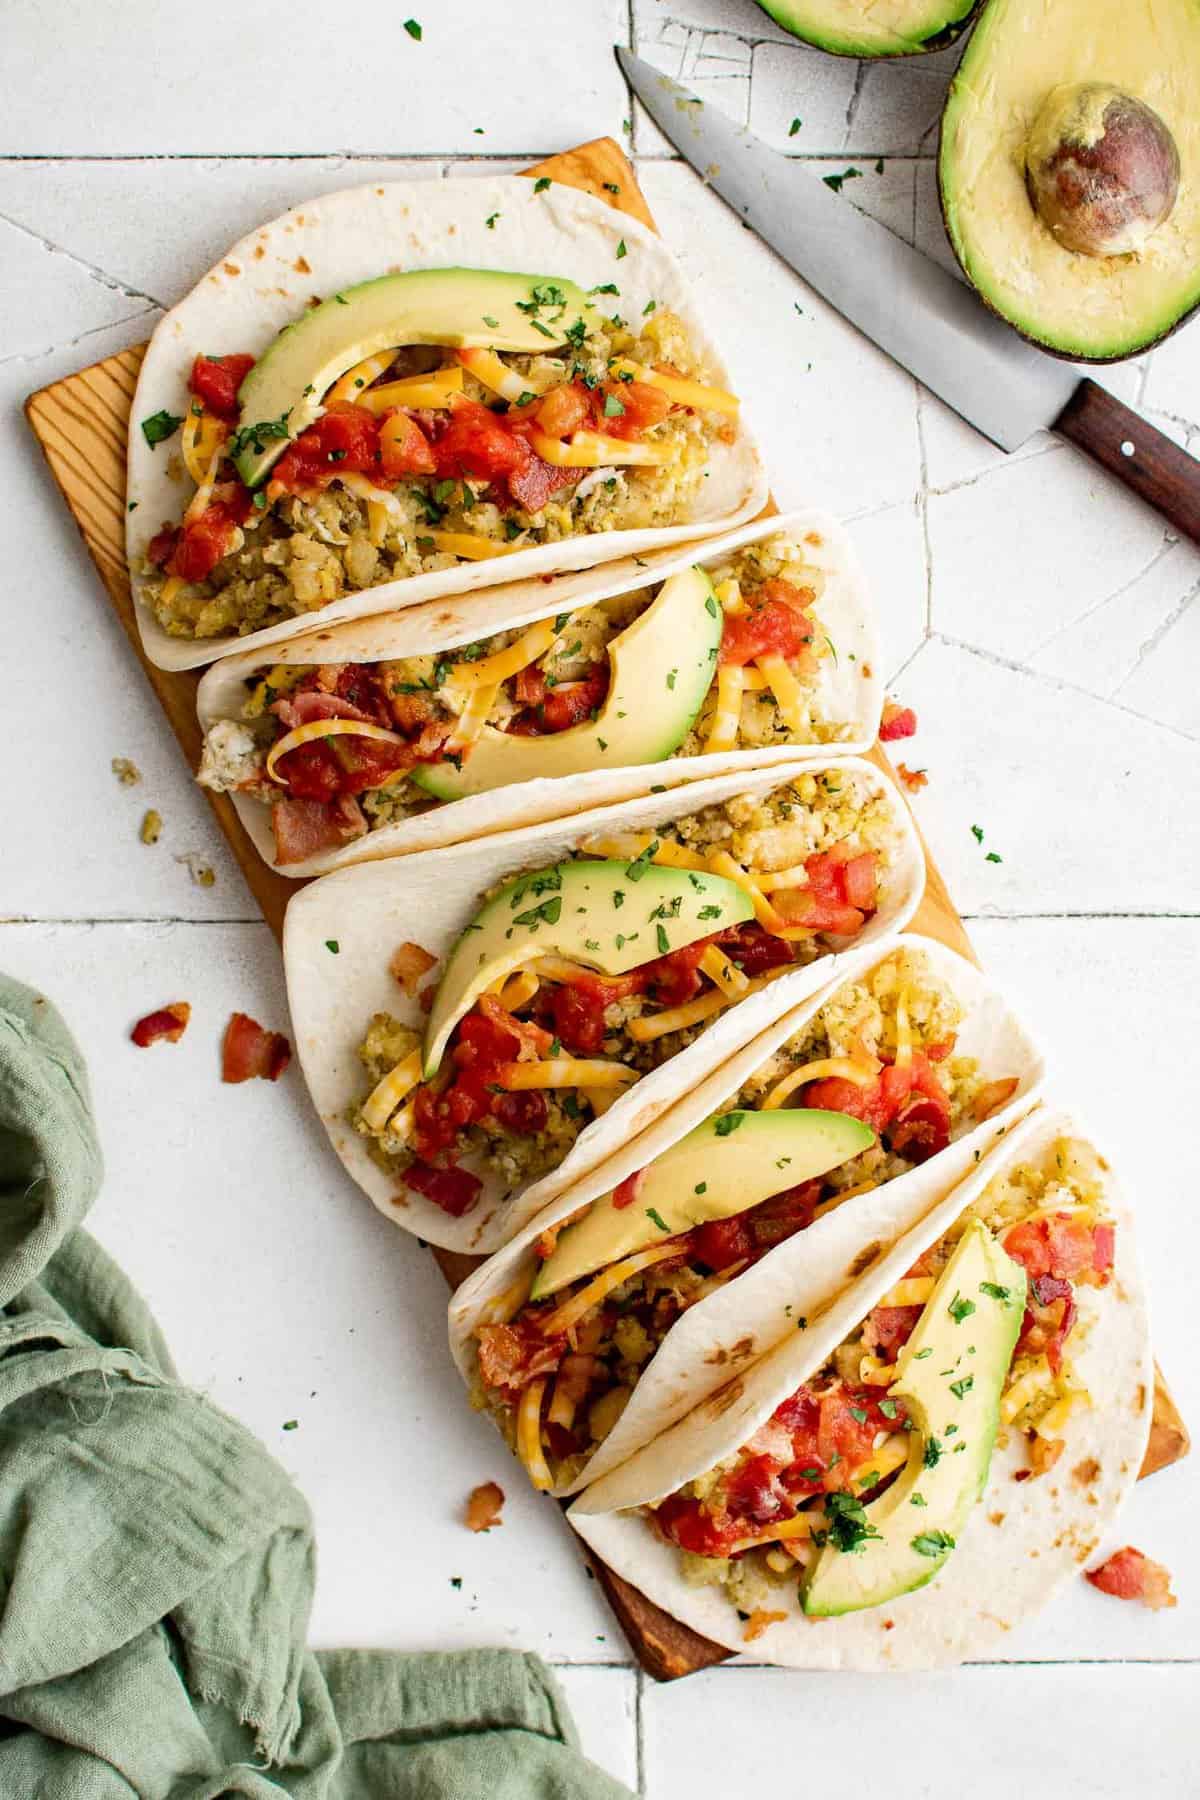 Breakfast tacos lined up on a serving platter.